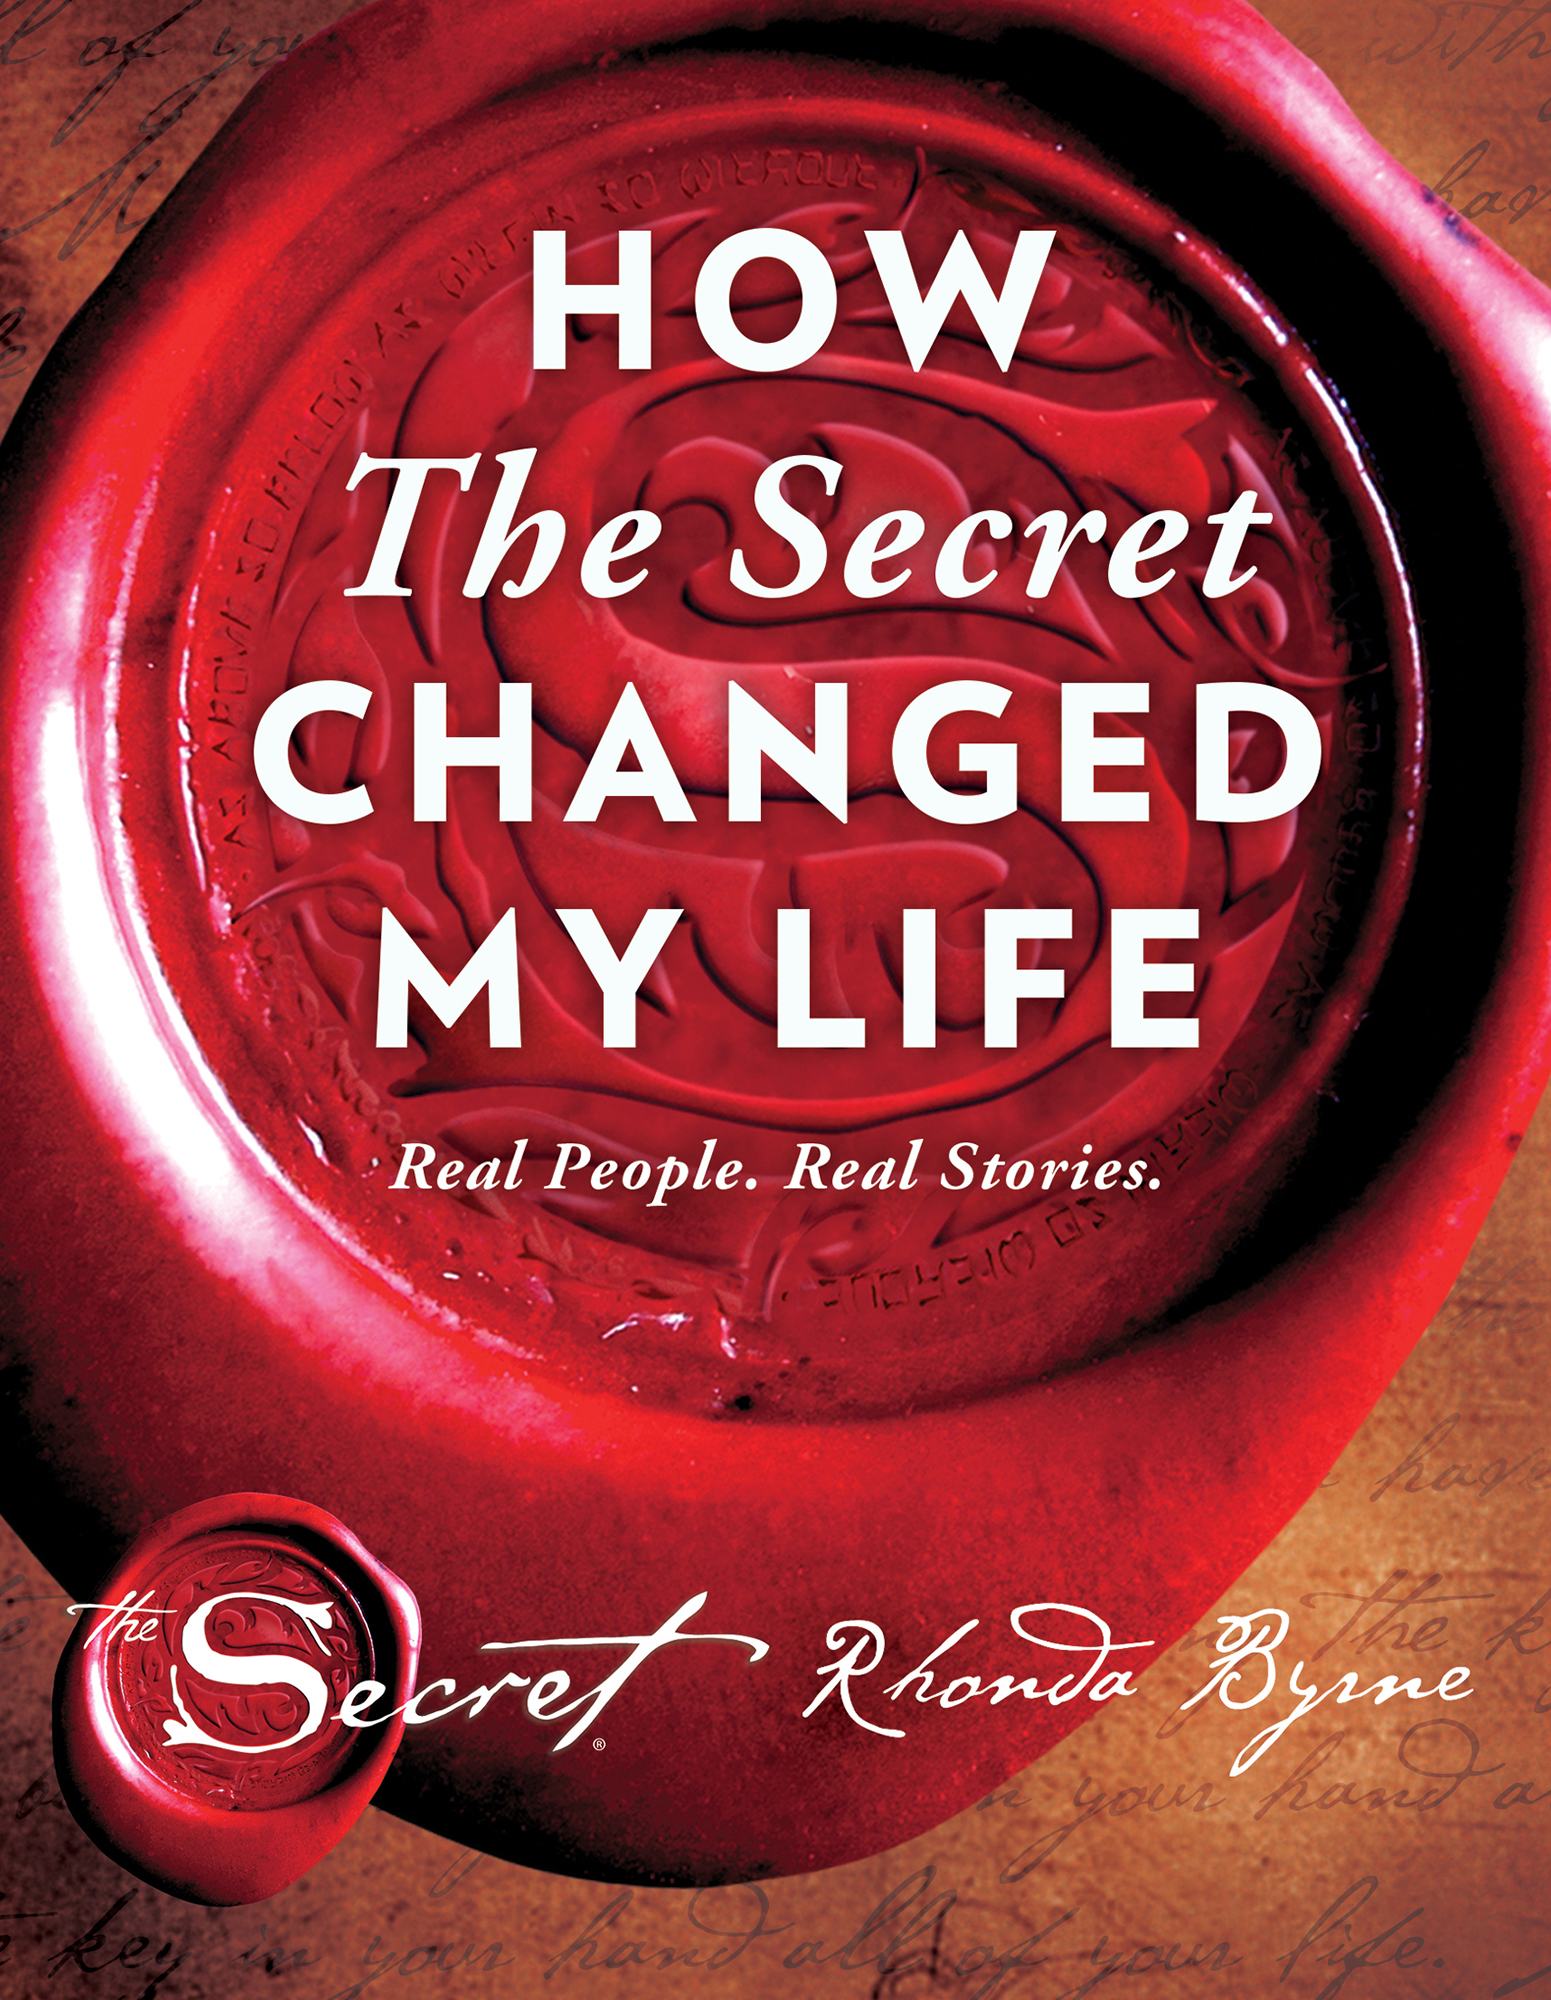 How the Secret Changed My Life: Real People - Real Stories